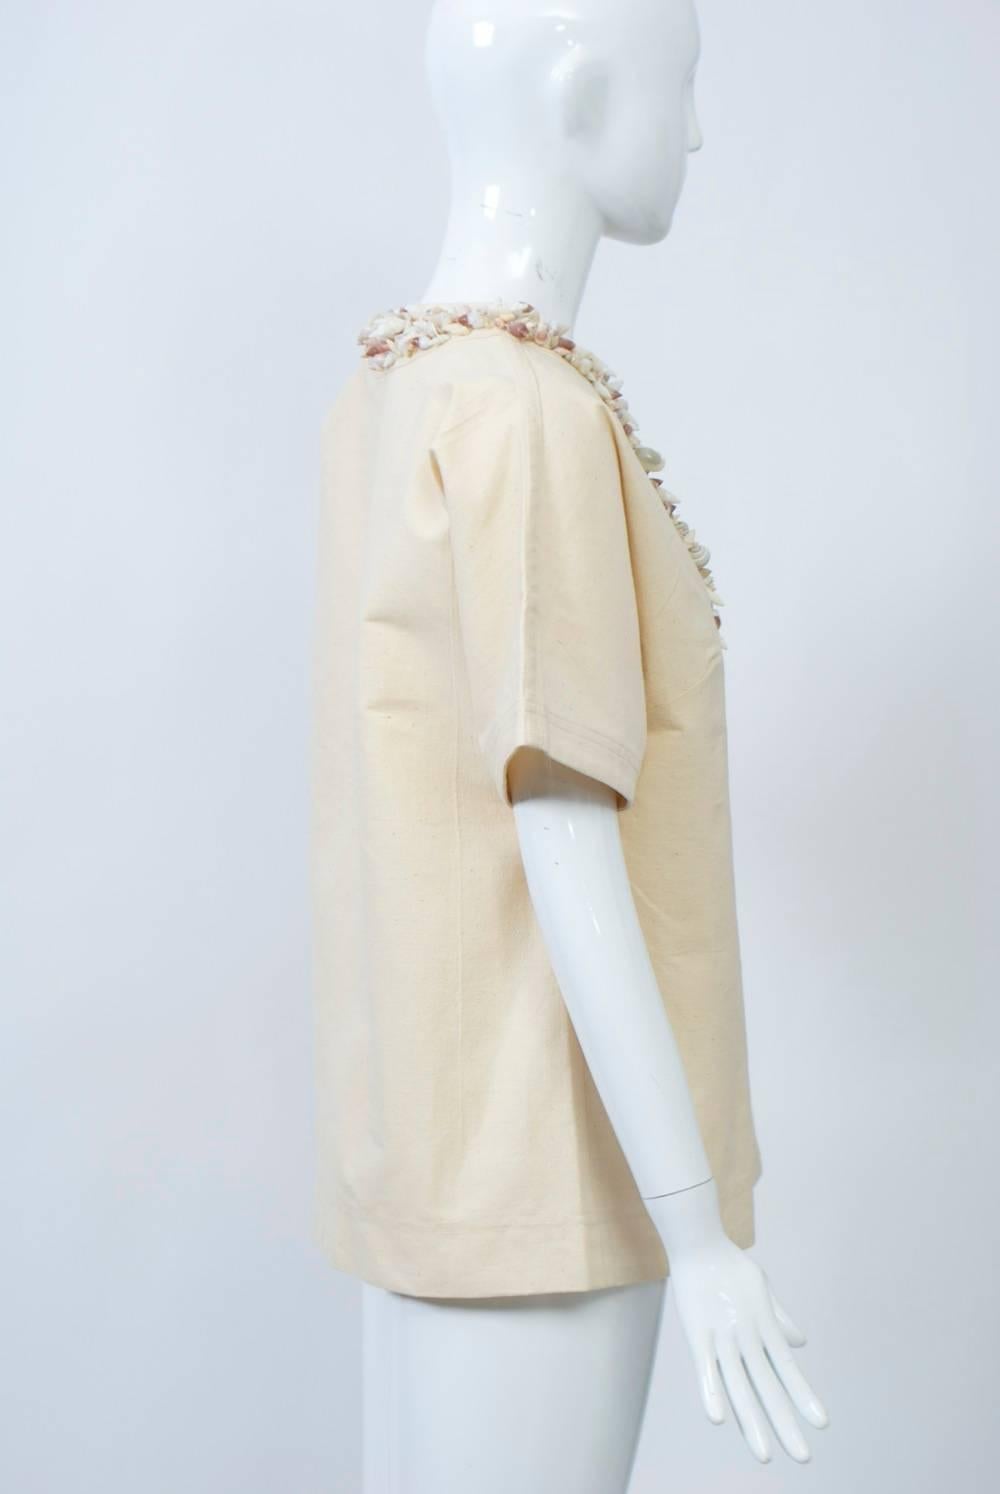 A unique vintage tunic of beige canvas thickly embellished with complementary small shells around the slit neckline. Short, raglan sleeves. Slips over the head. 